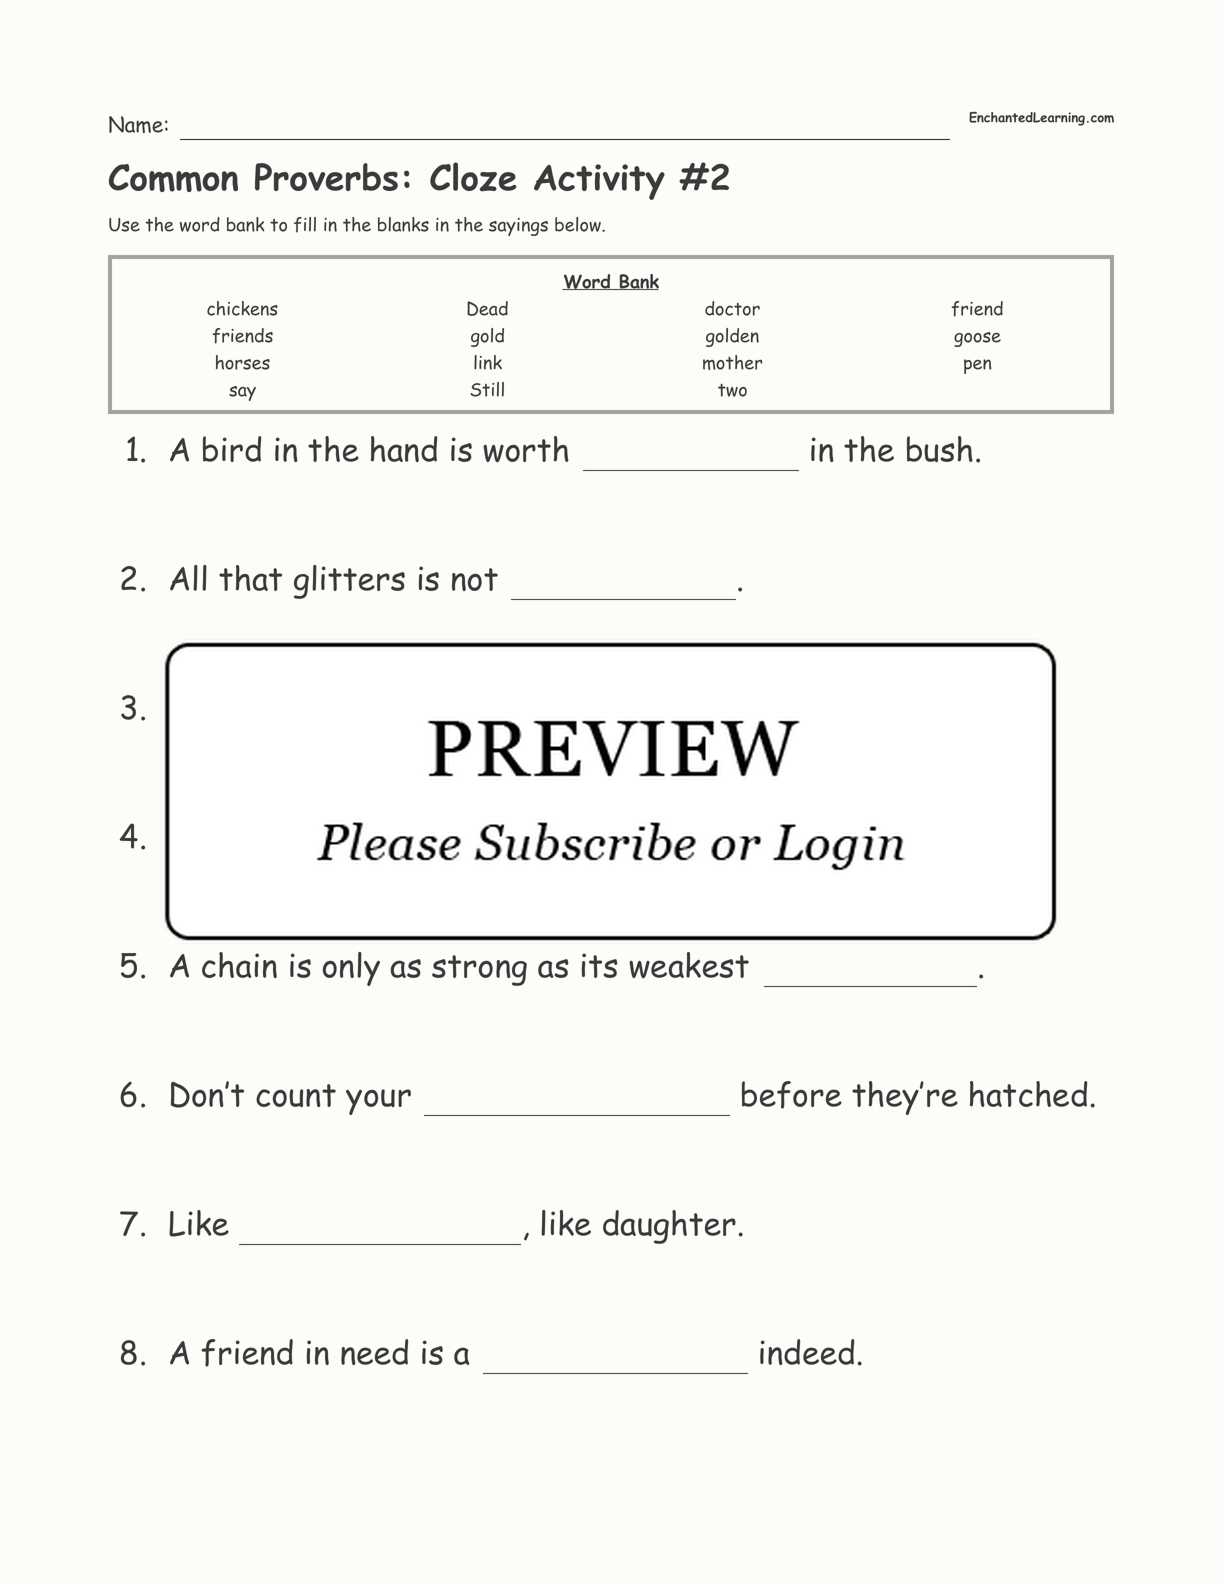 Common Proverbs: Cloze Activity #2 interactive worksheet page 1